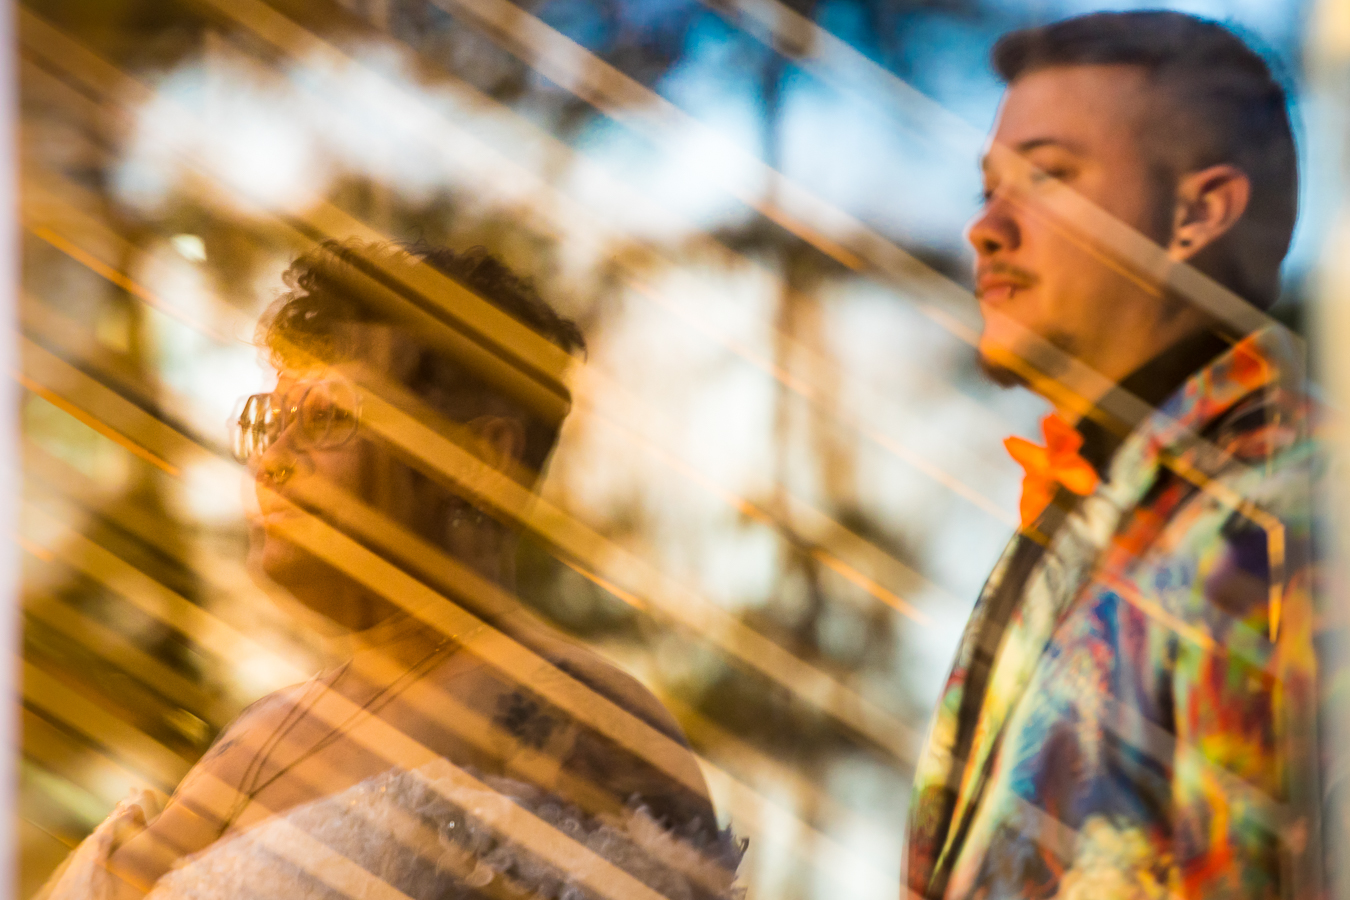 Creative LGBTQ Wedding Photographer, Lisa Rhinehart, captures this unique, creative image of the couple looking off into sunset caught in the reflection of the glass at the mansion 